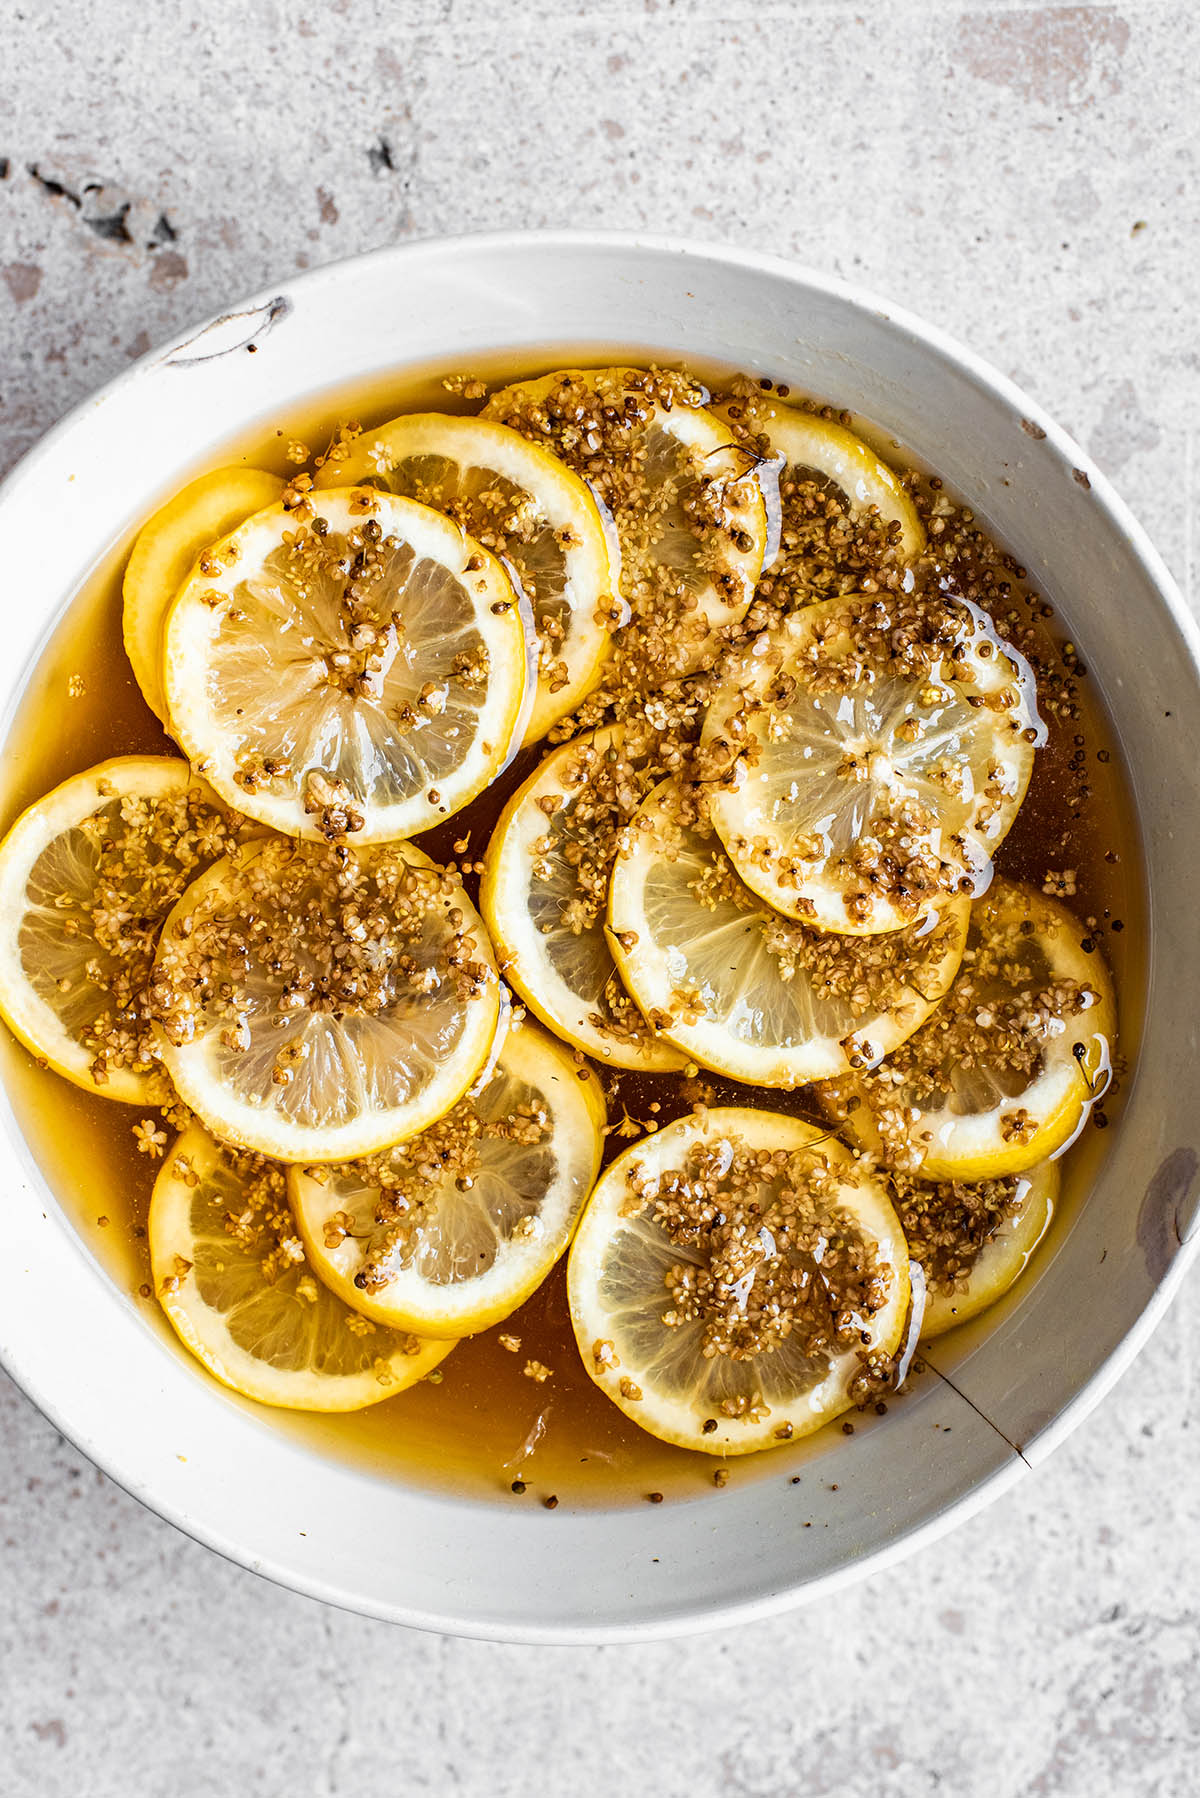 Lemon slices and elderflowers in a bowl floating in a dark syrup.